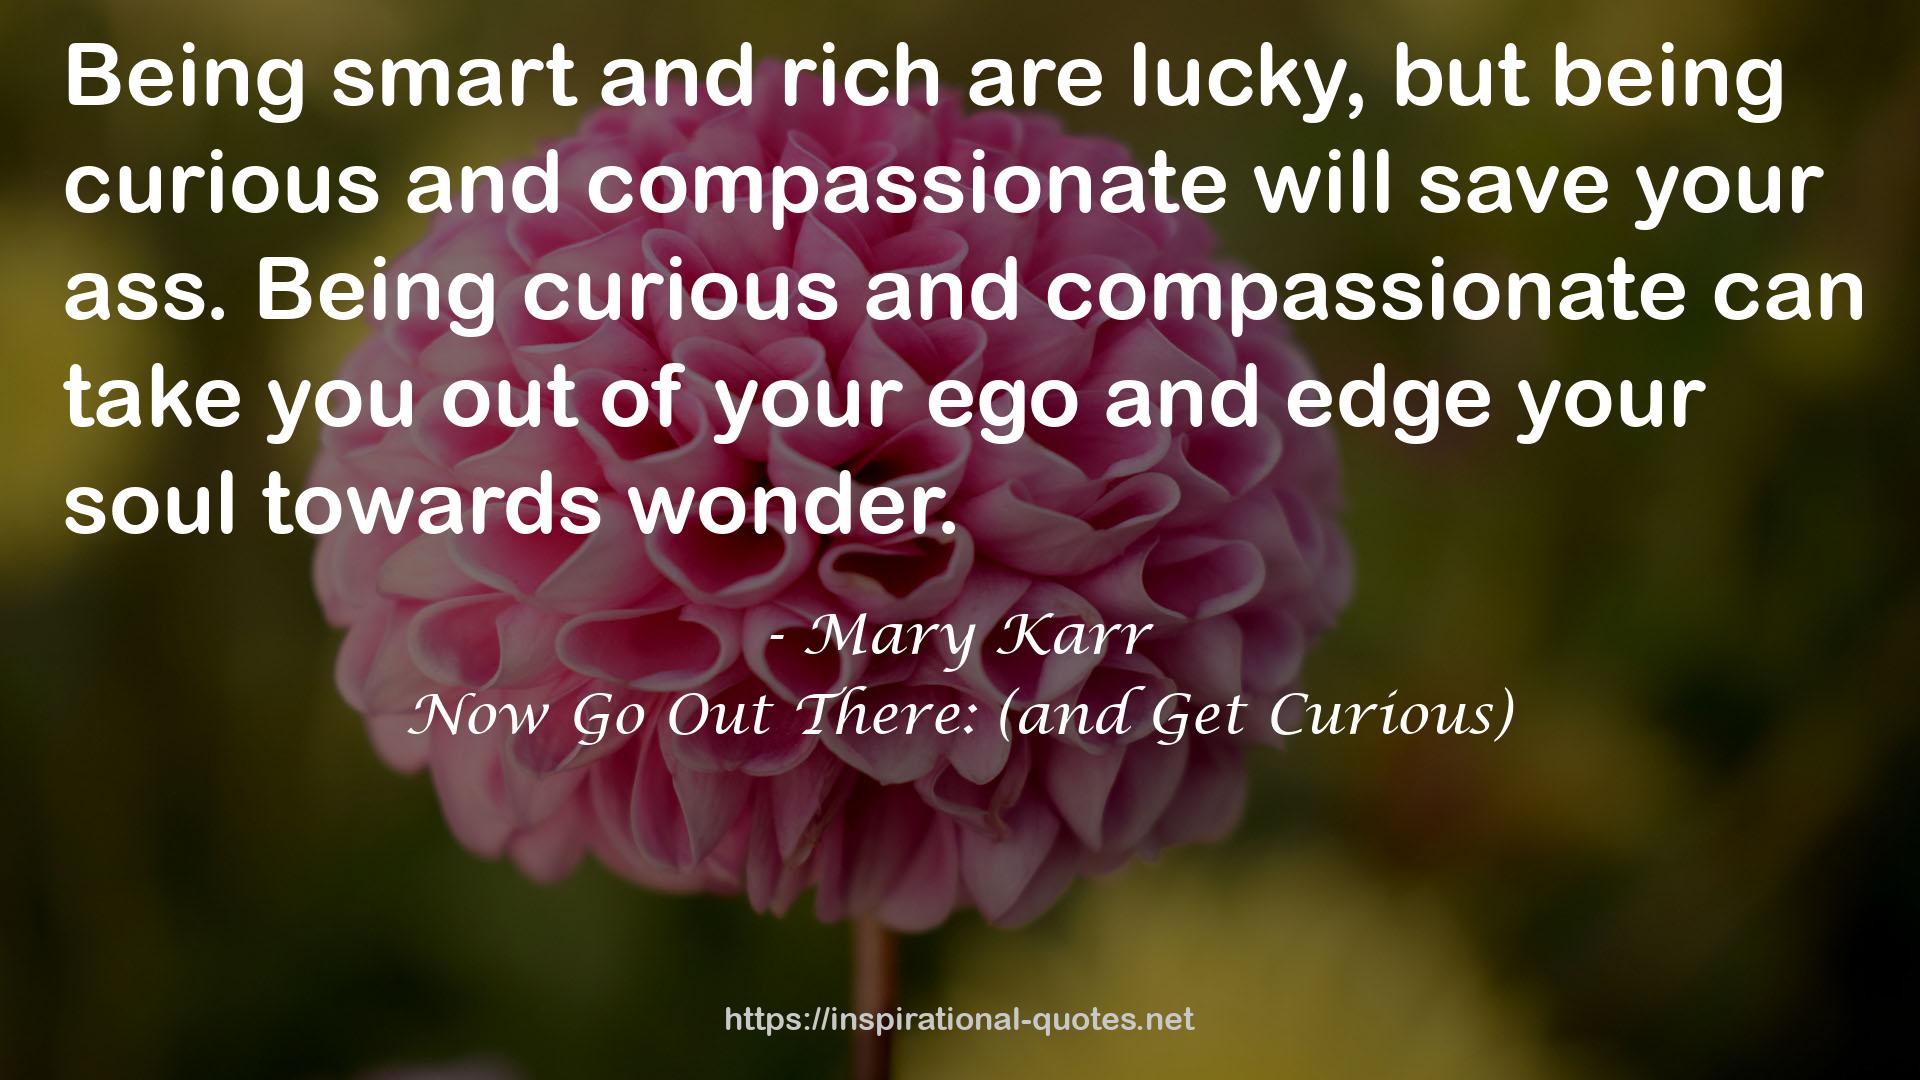 Now Go Out There: (and Get Curious) QUOTES